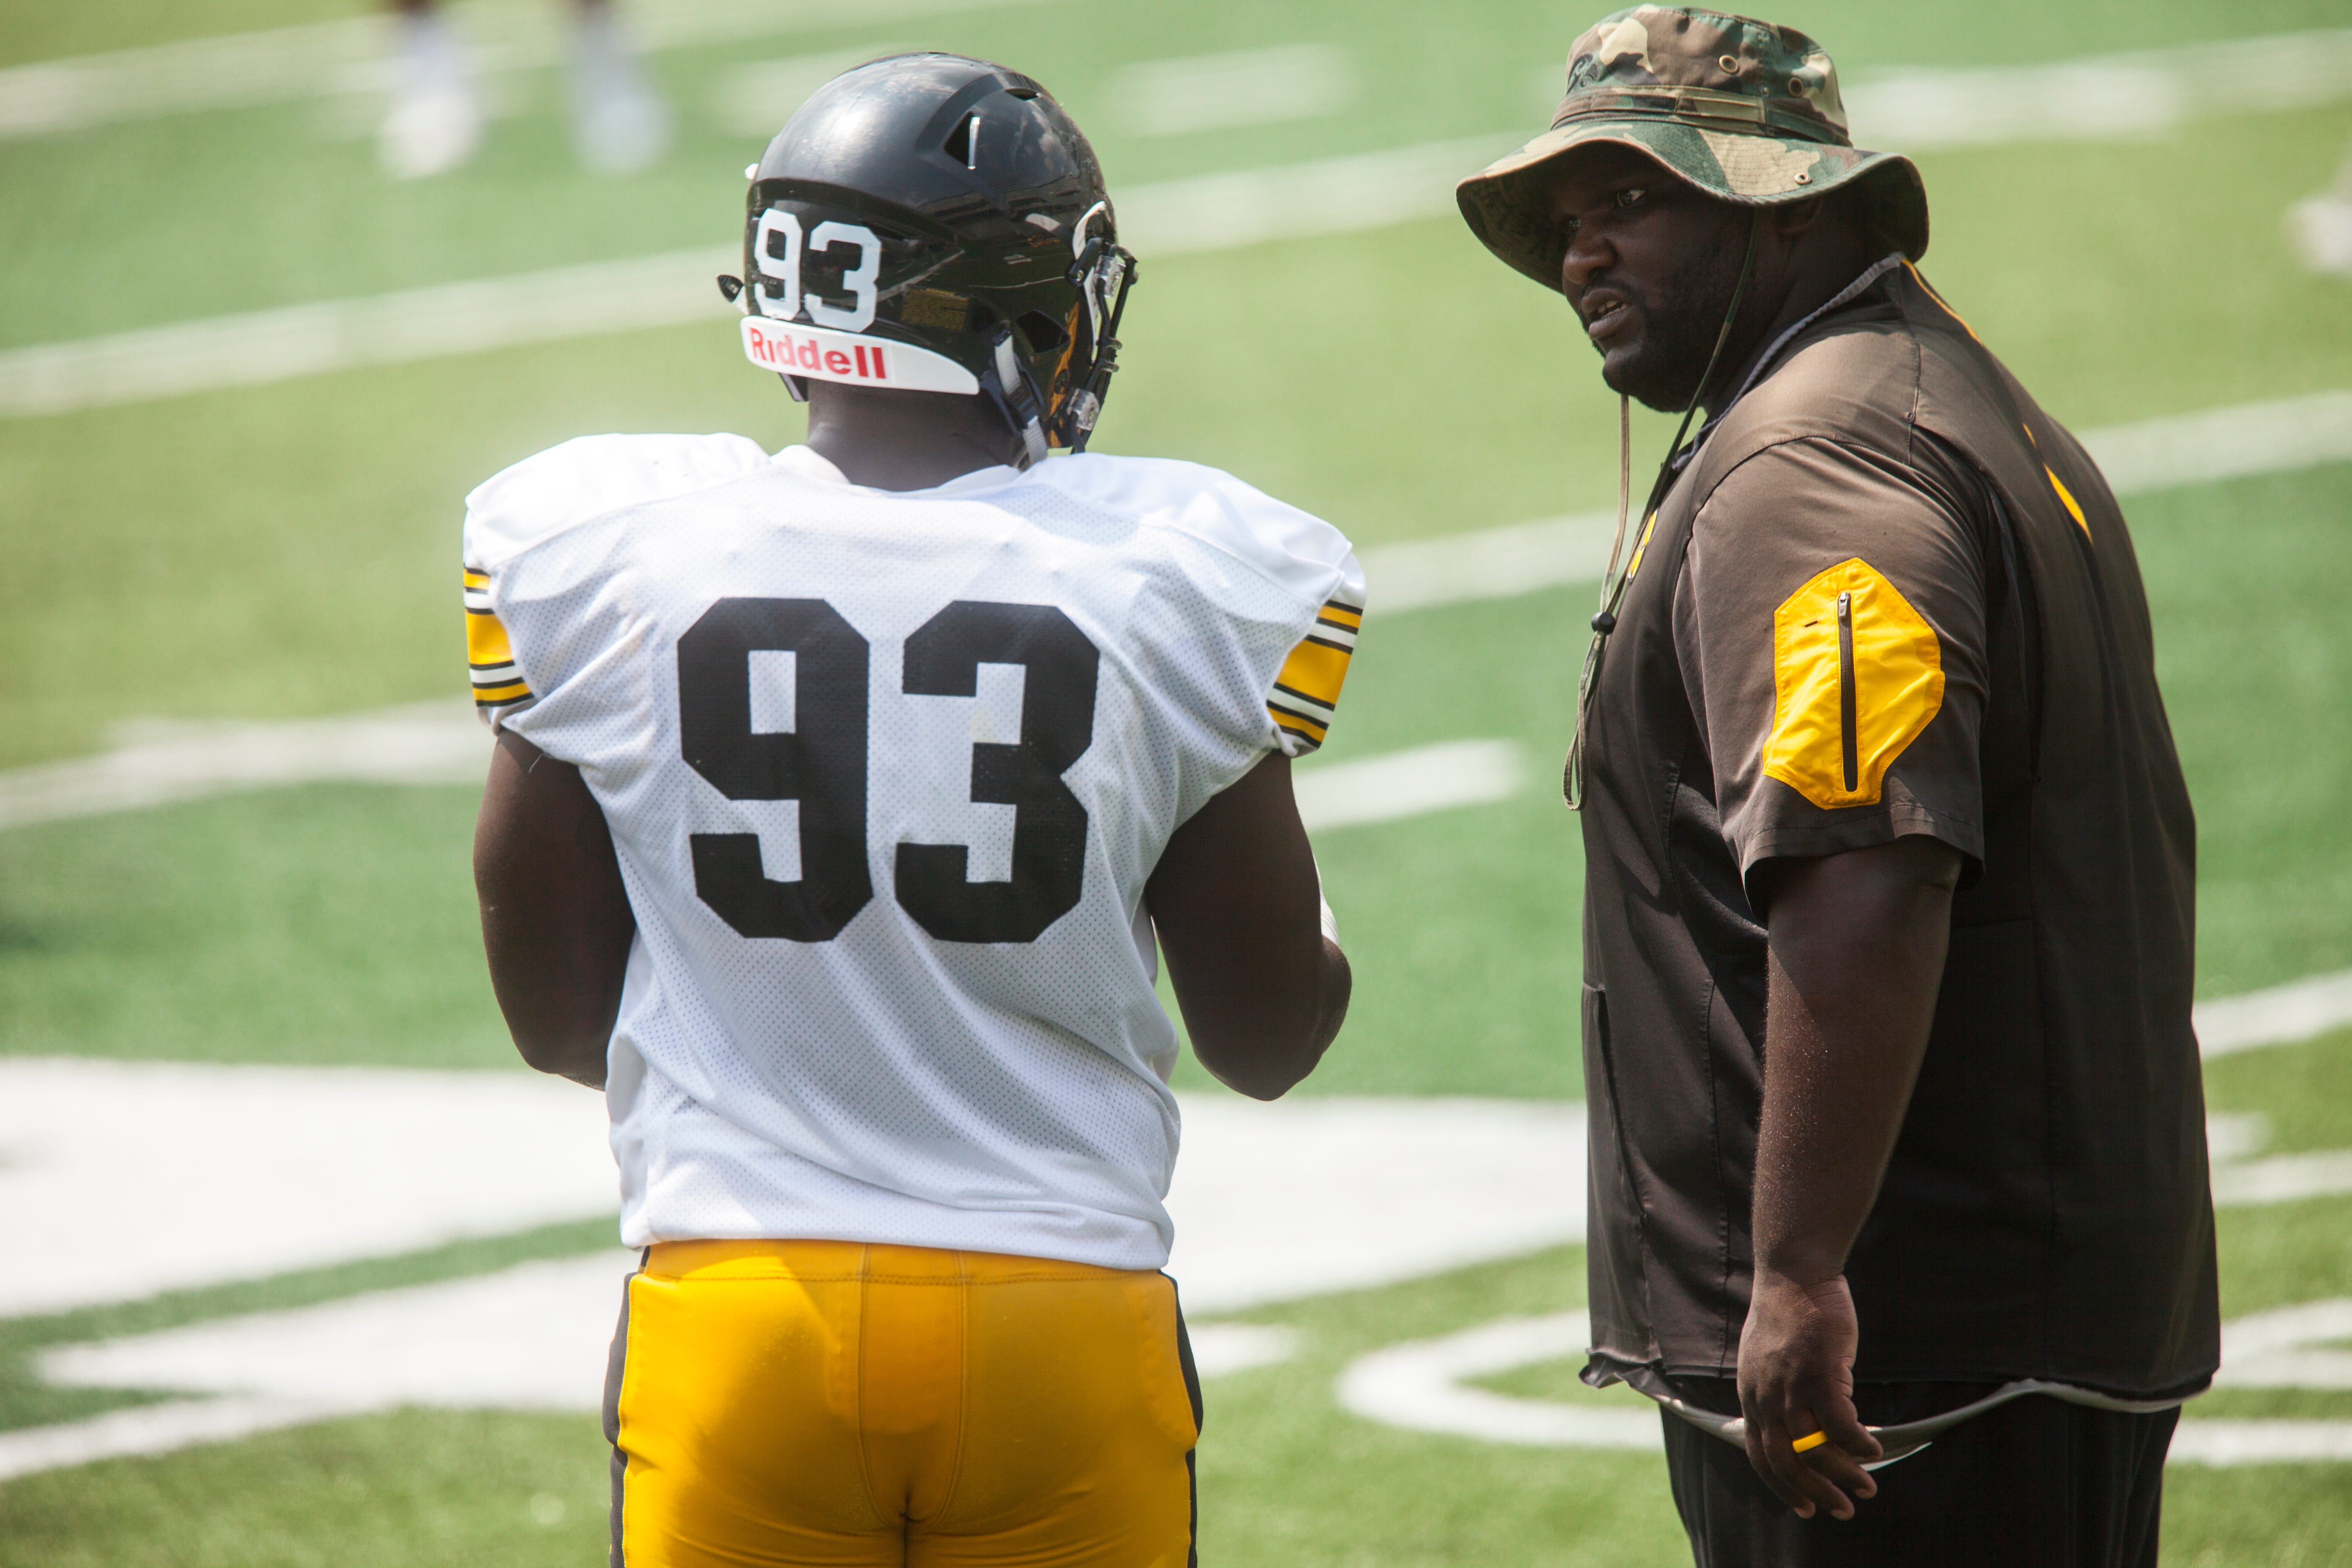 Iowa assistant defensive line coach Kelvin Bell talks with defensive end Brandon Simon during a Kids Day practice on Saturday, Aug. 11, 2018, at Kinnick Stadium in Iowa City.